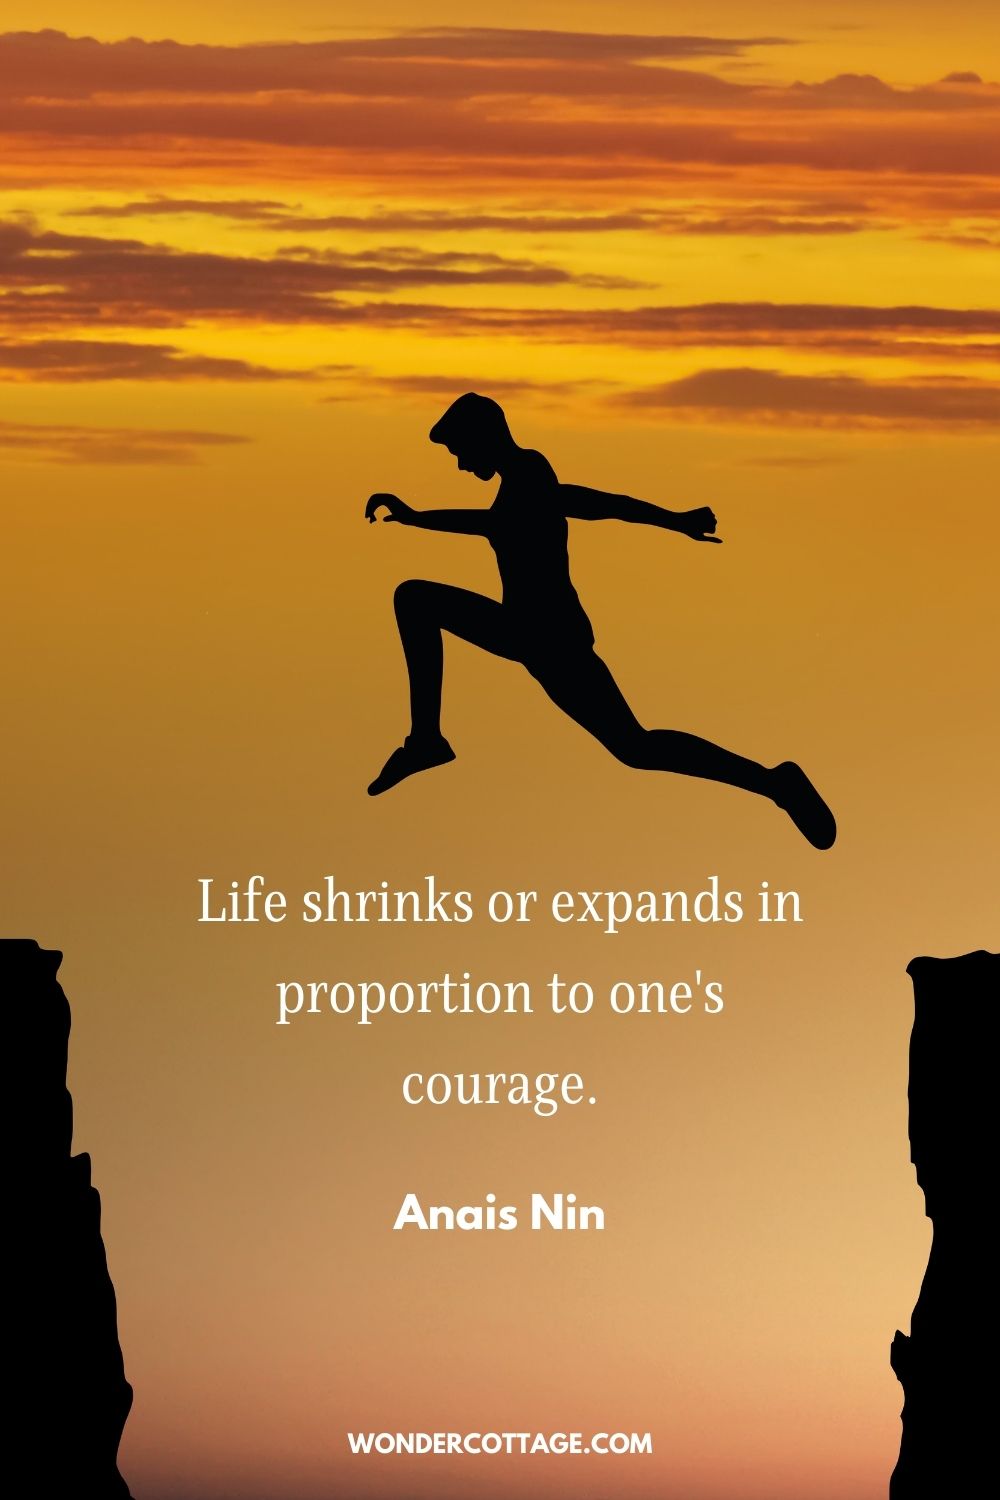 Life shrinks or expands in proportion to one's courage. Anais Nin